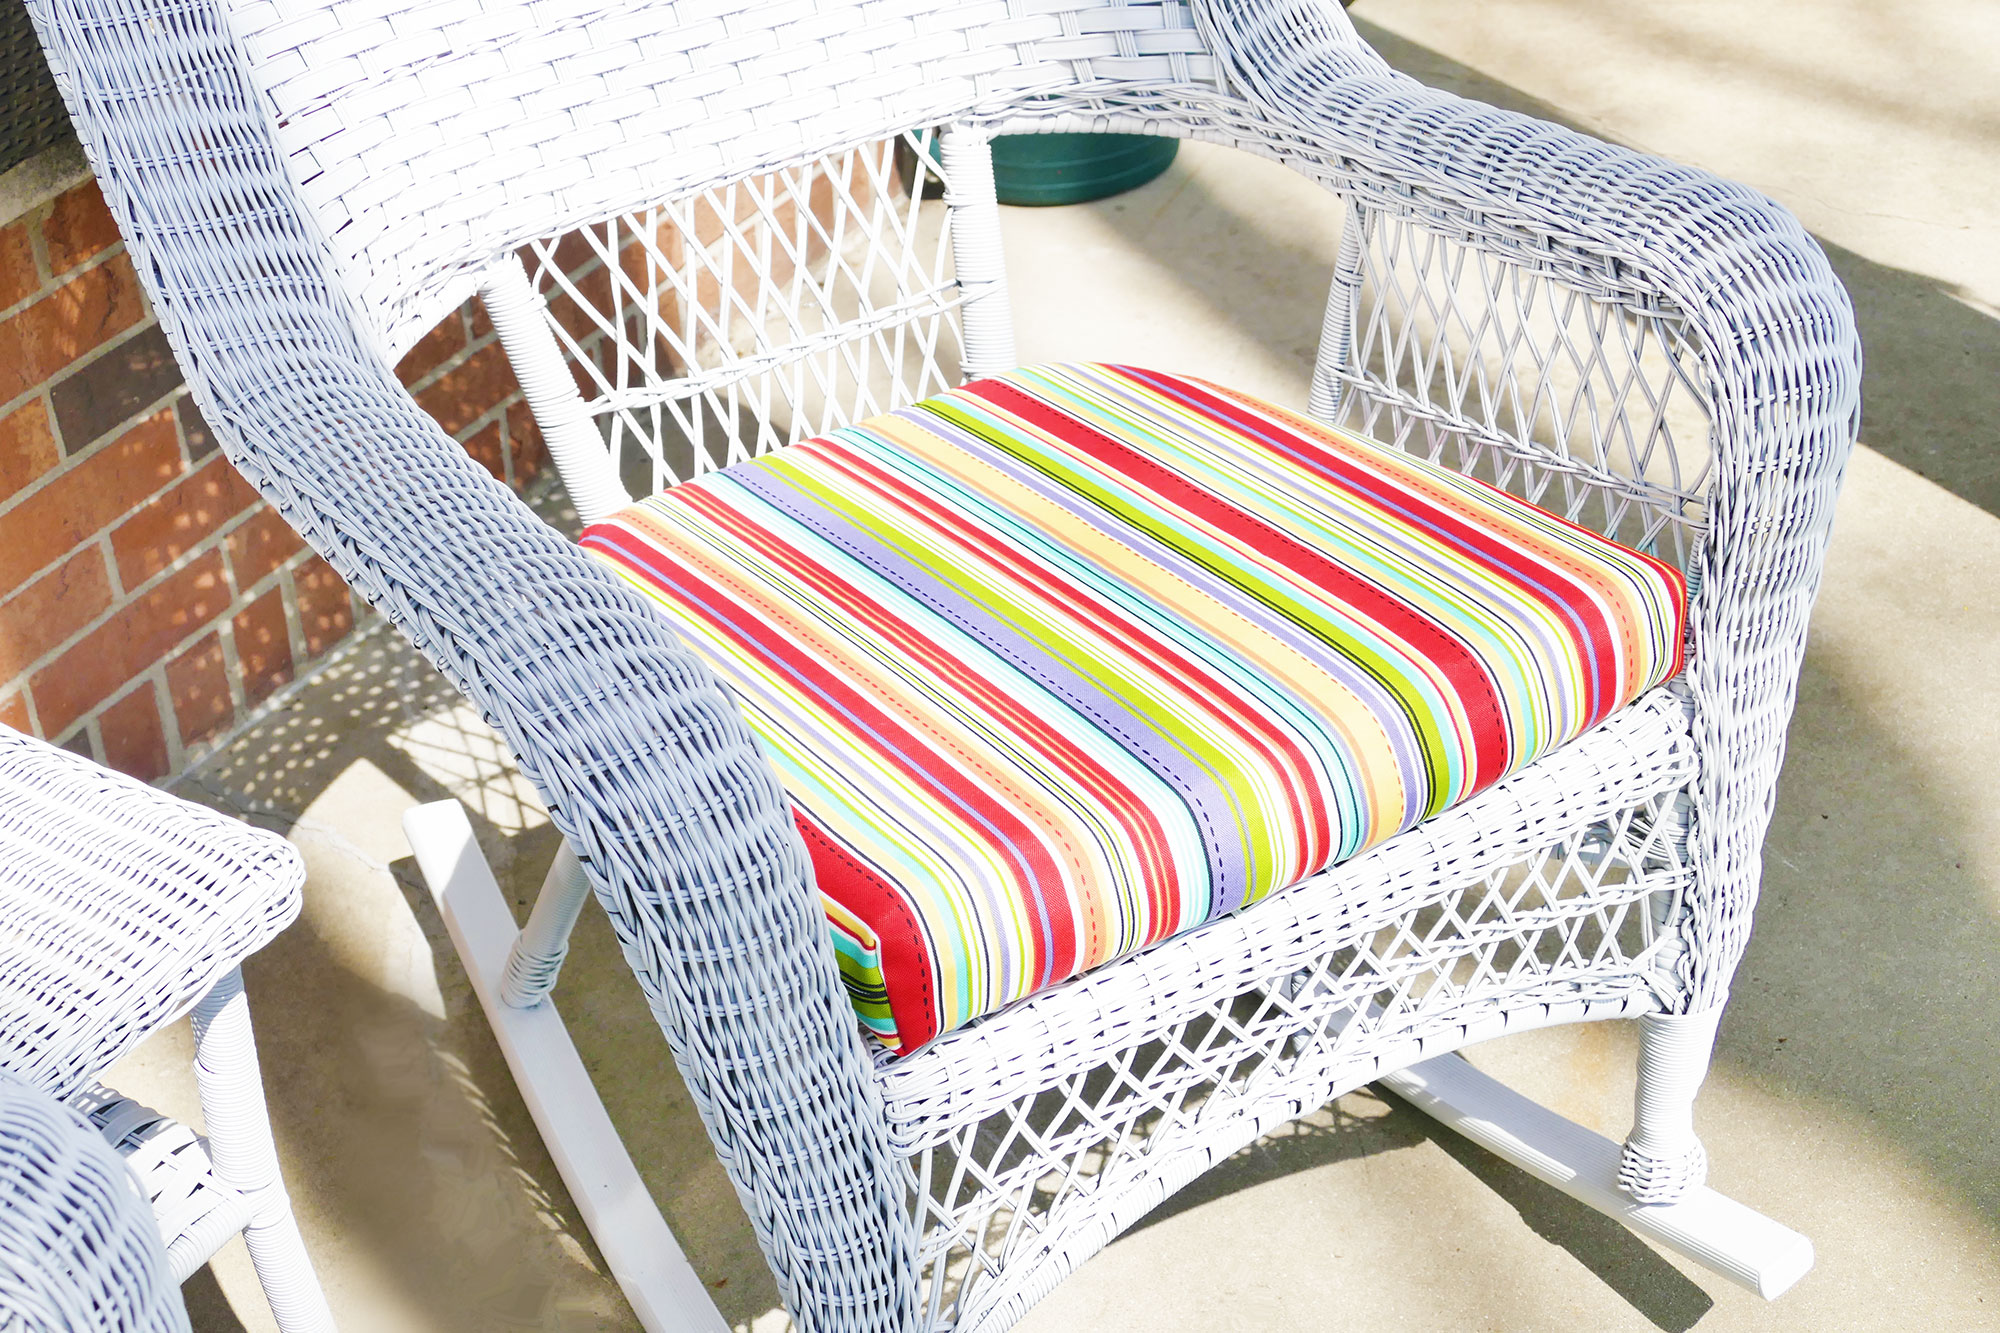 How to Recover Your Old Outdoor Cushions Easily & Quickly | JenniferMaker.com